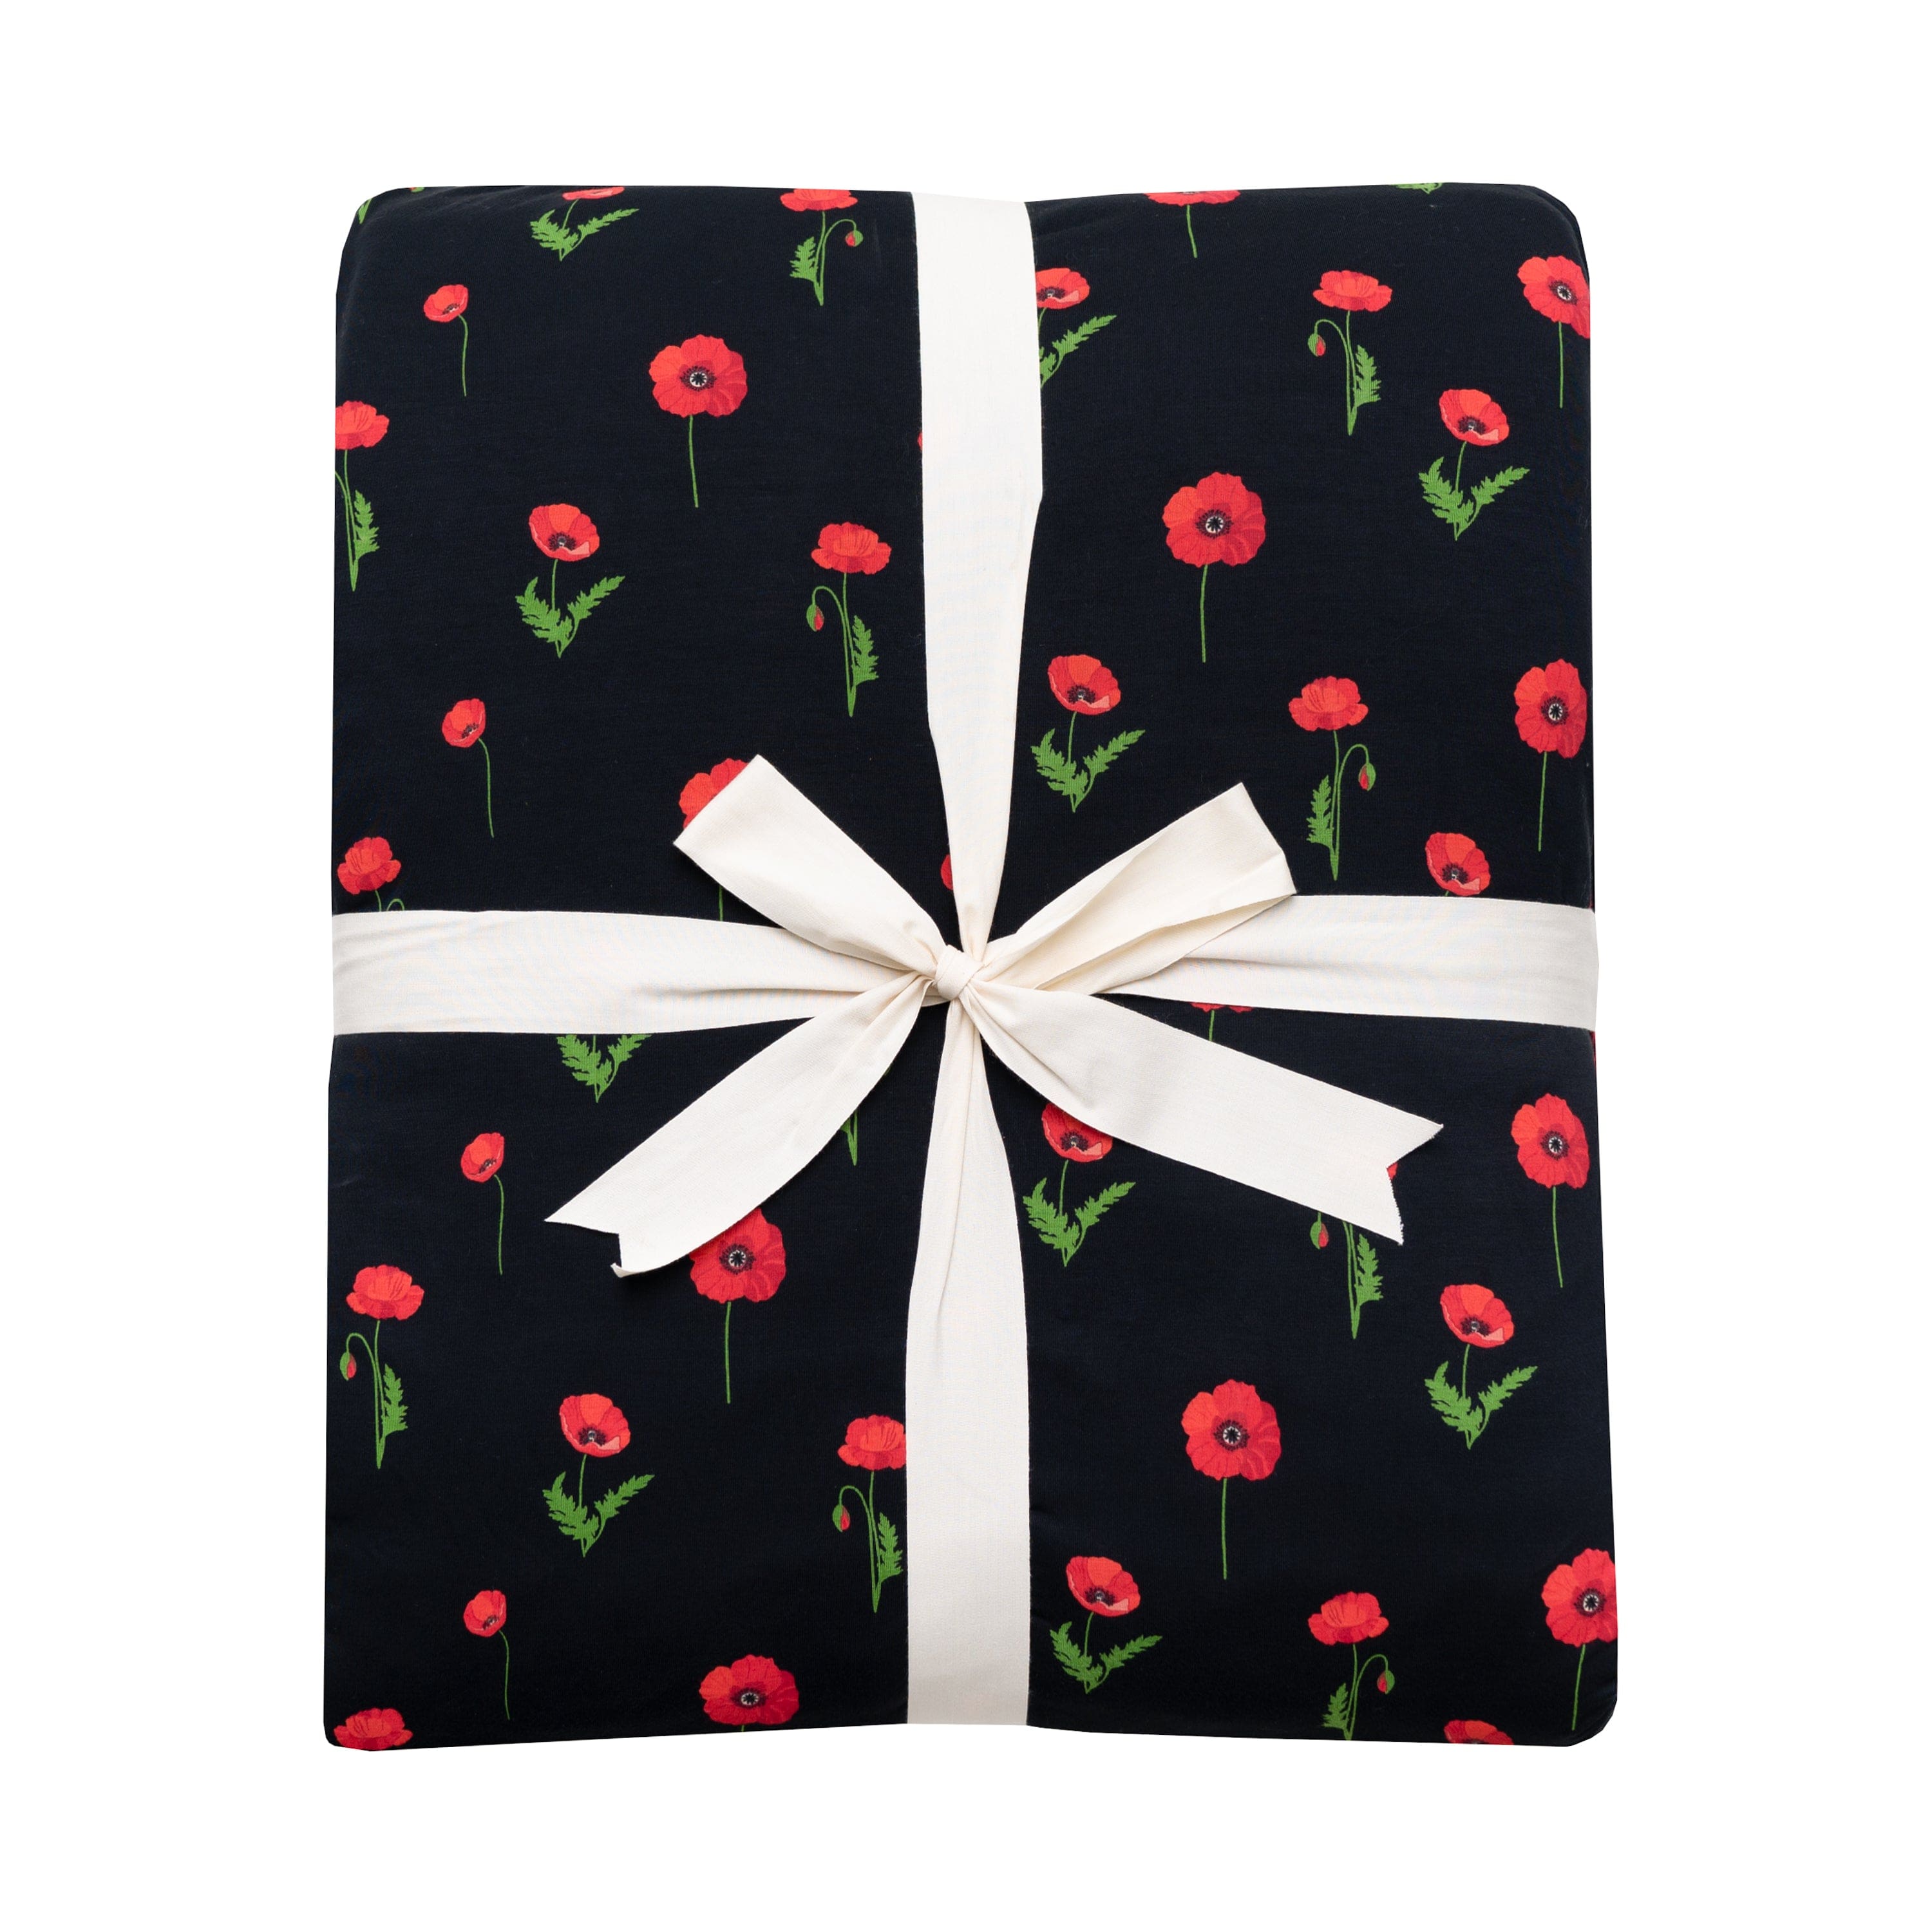 Kyte Baby Adult Blanket Midnight Poppies / Adult Adult Quilted Blanket in Midnight Poppies 2.5